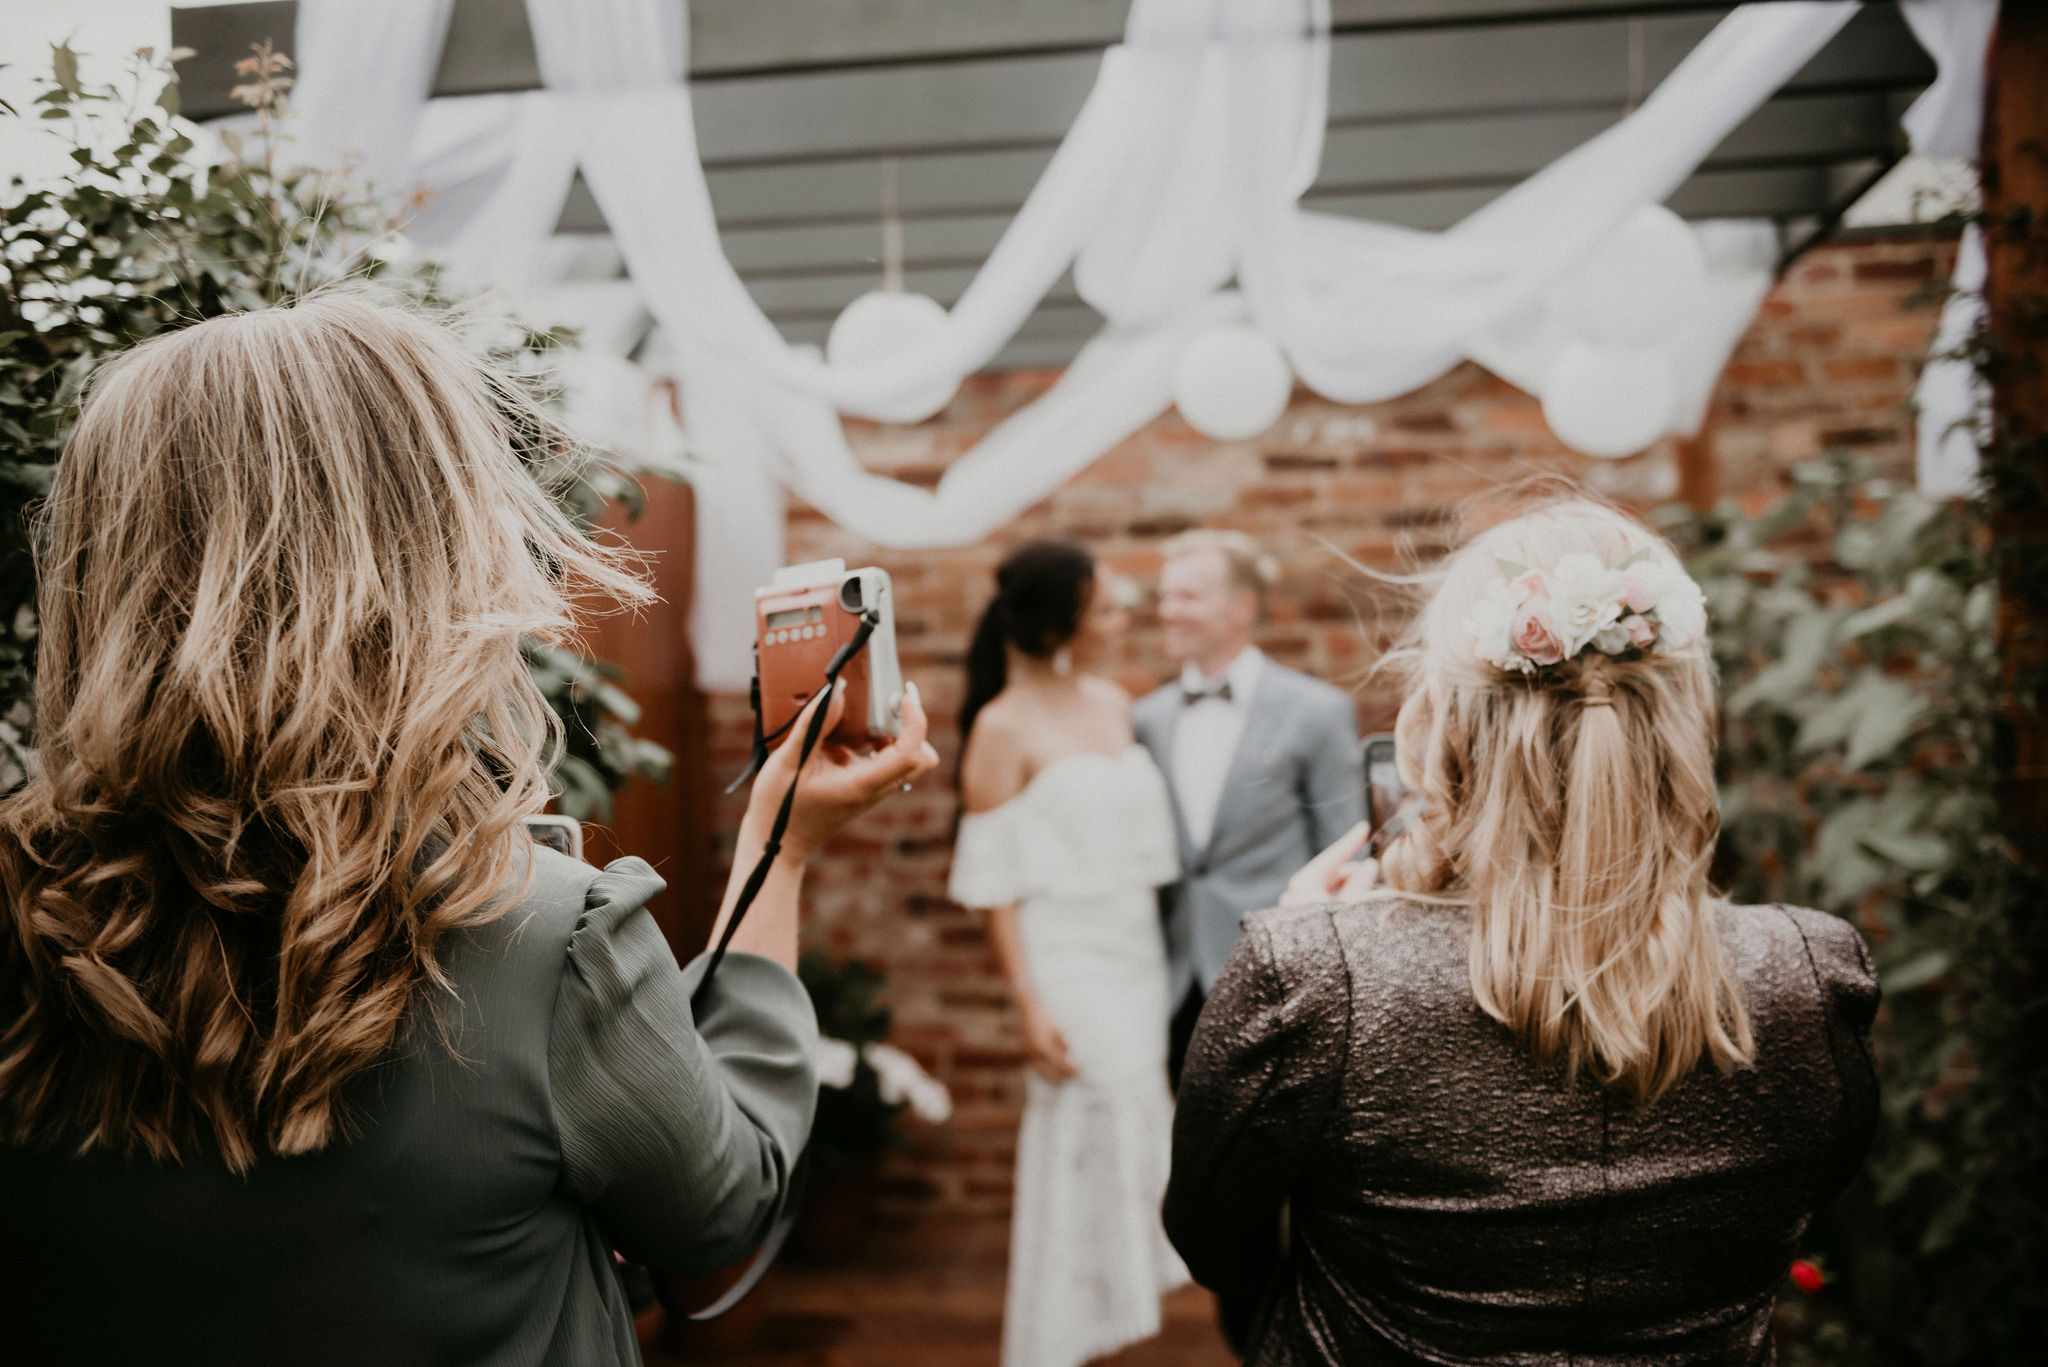 Lets-Elope-Melbourne-Celebrant-Photographer-Elopement-Package-Victoria-Sarah-Matler-Photography-Elope-at-Home-Footscray-weddings-intimate-15